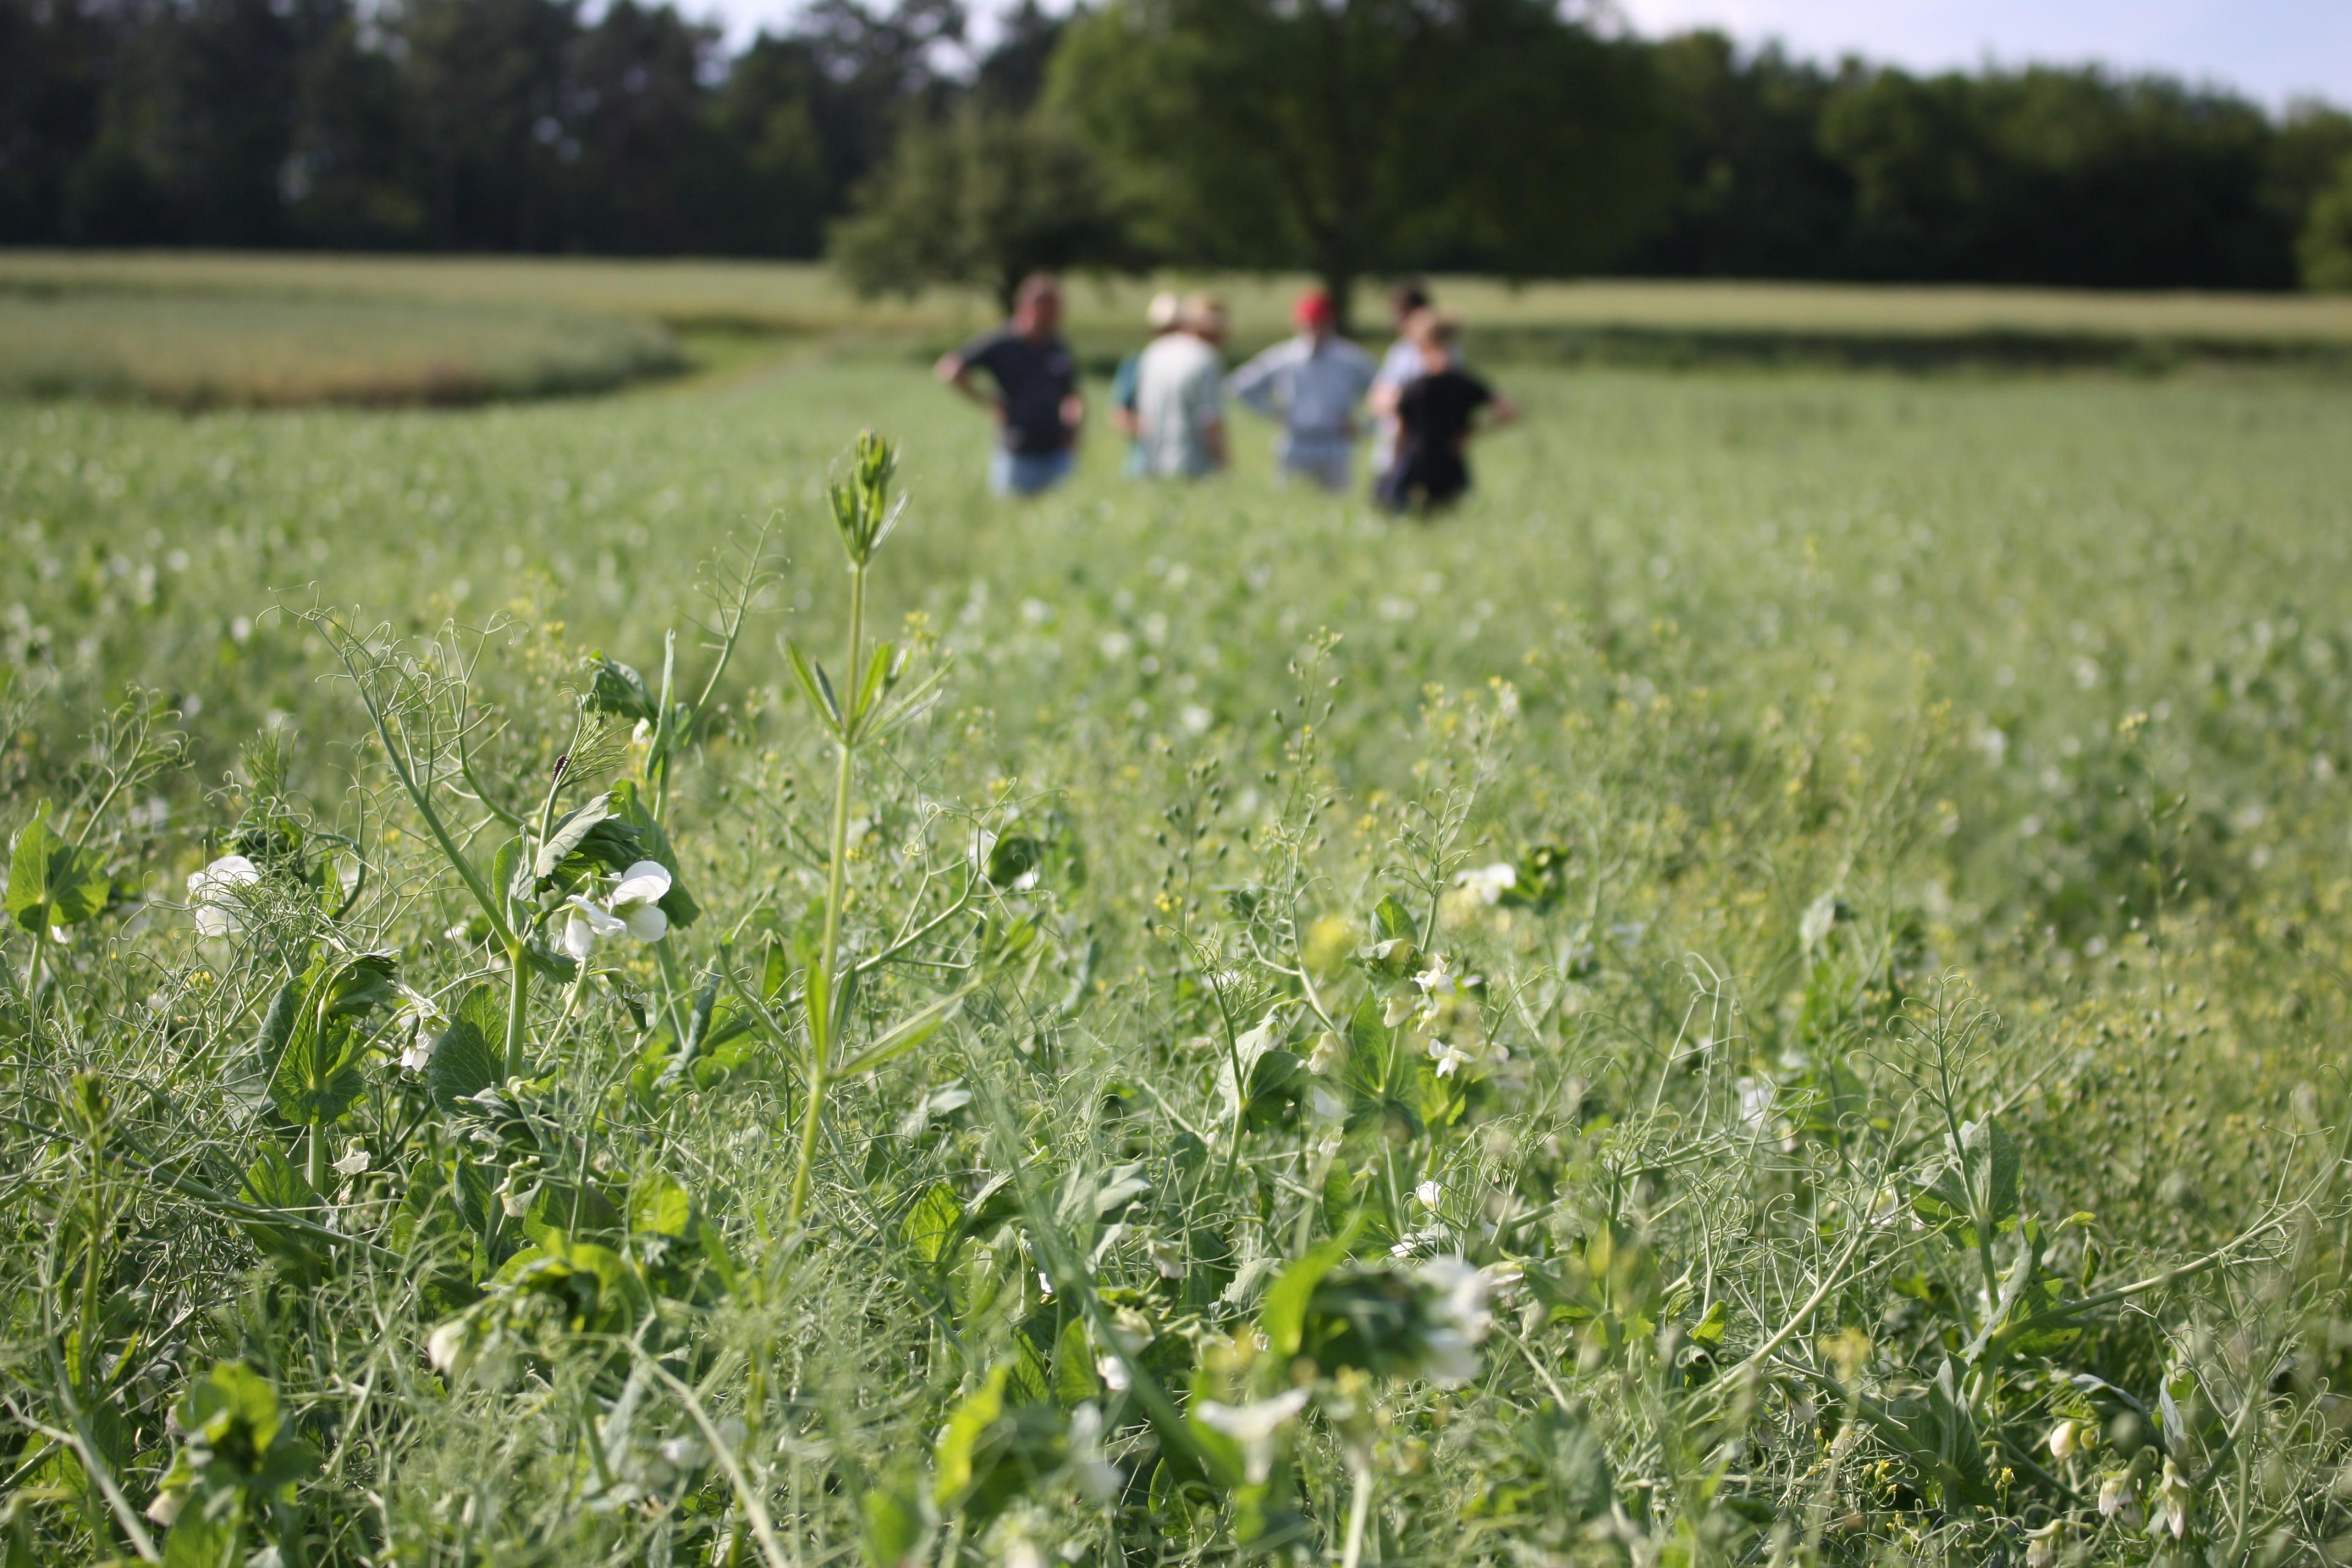 A field on which peas  false flax are grown. A group of people can be seen in the background.